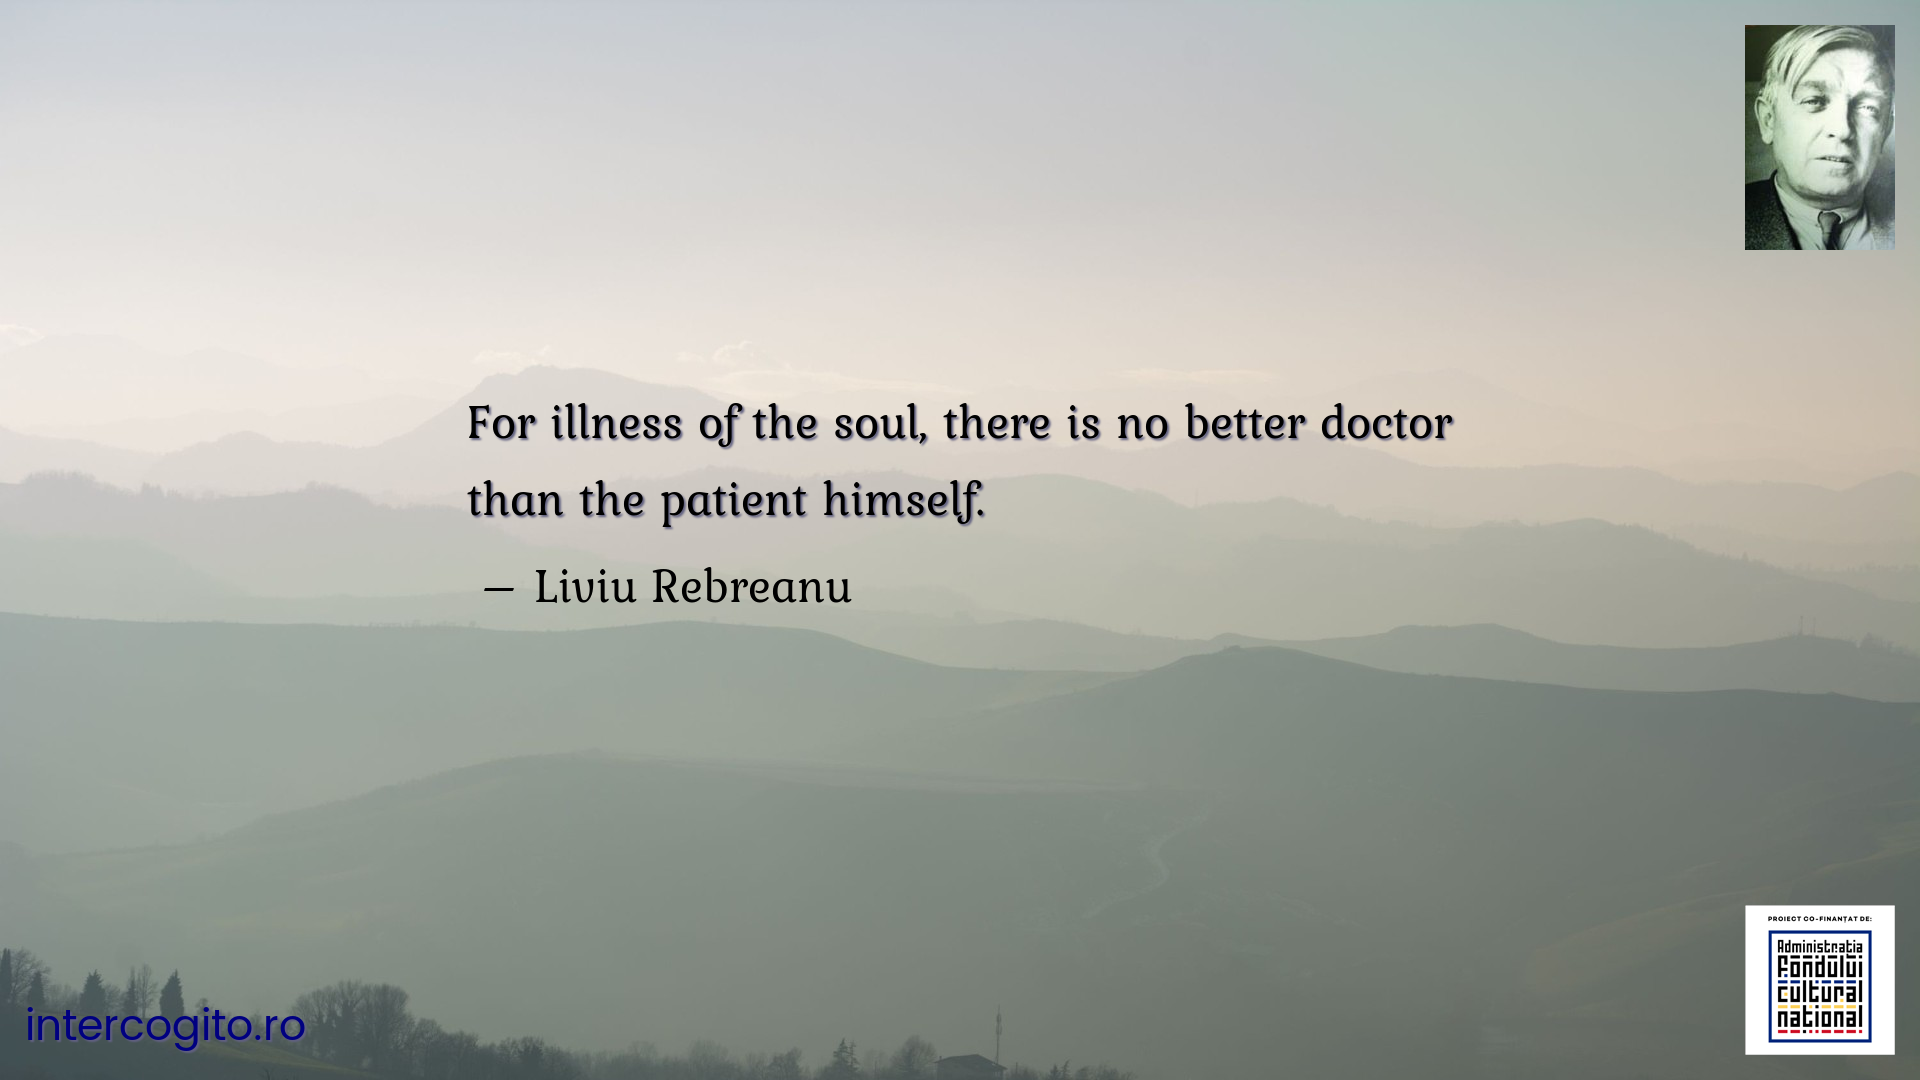 For illness of the soul, there is no better doctor than the patient himself.